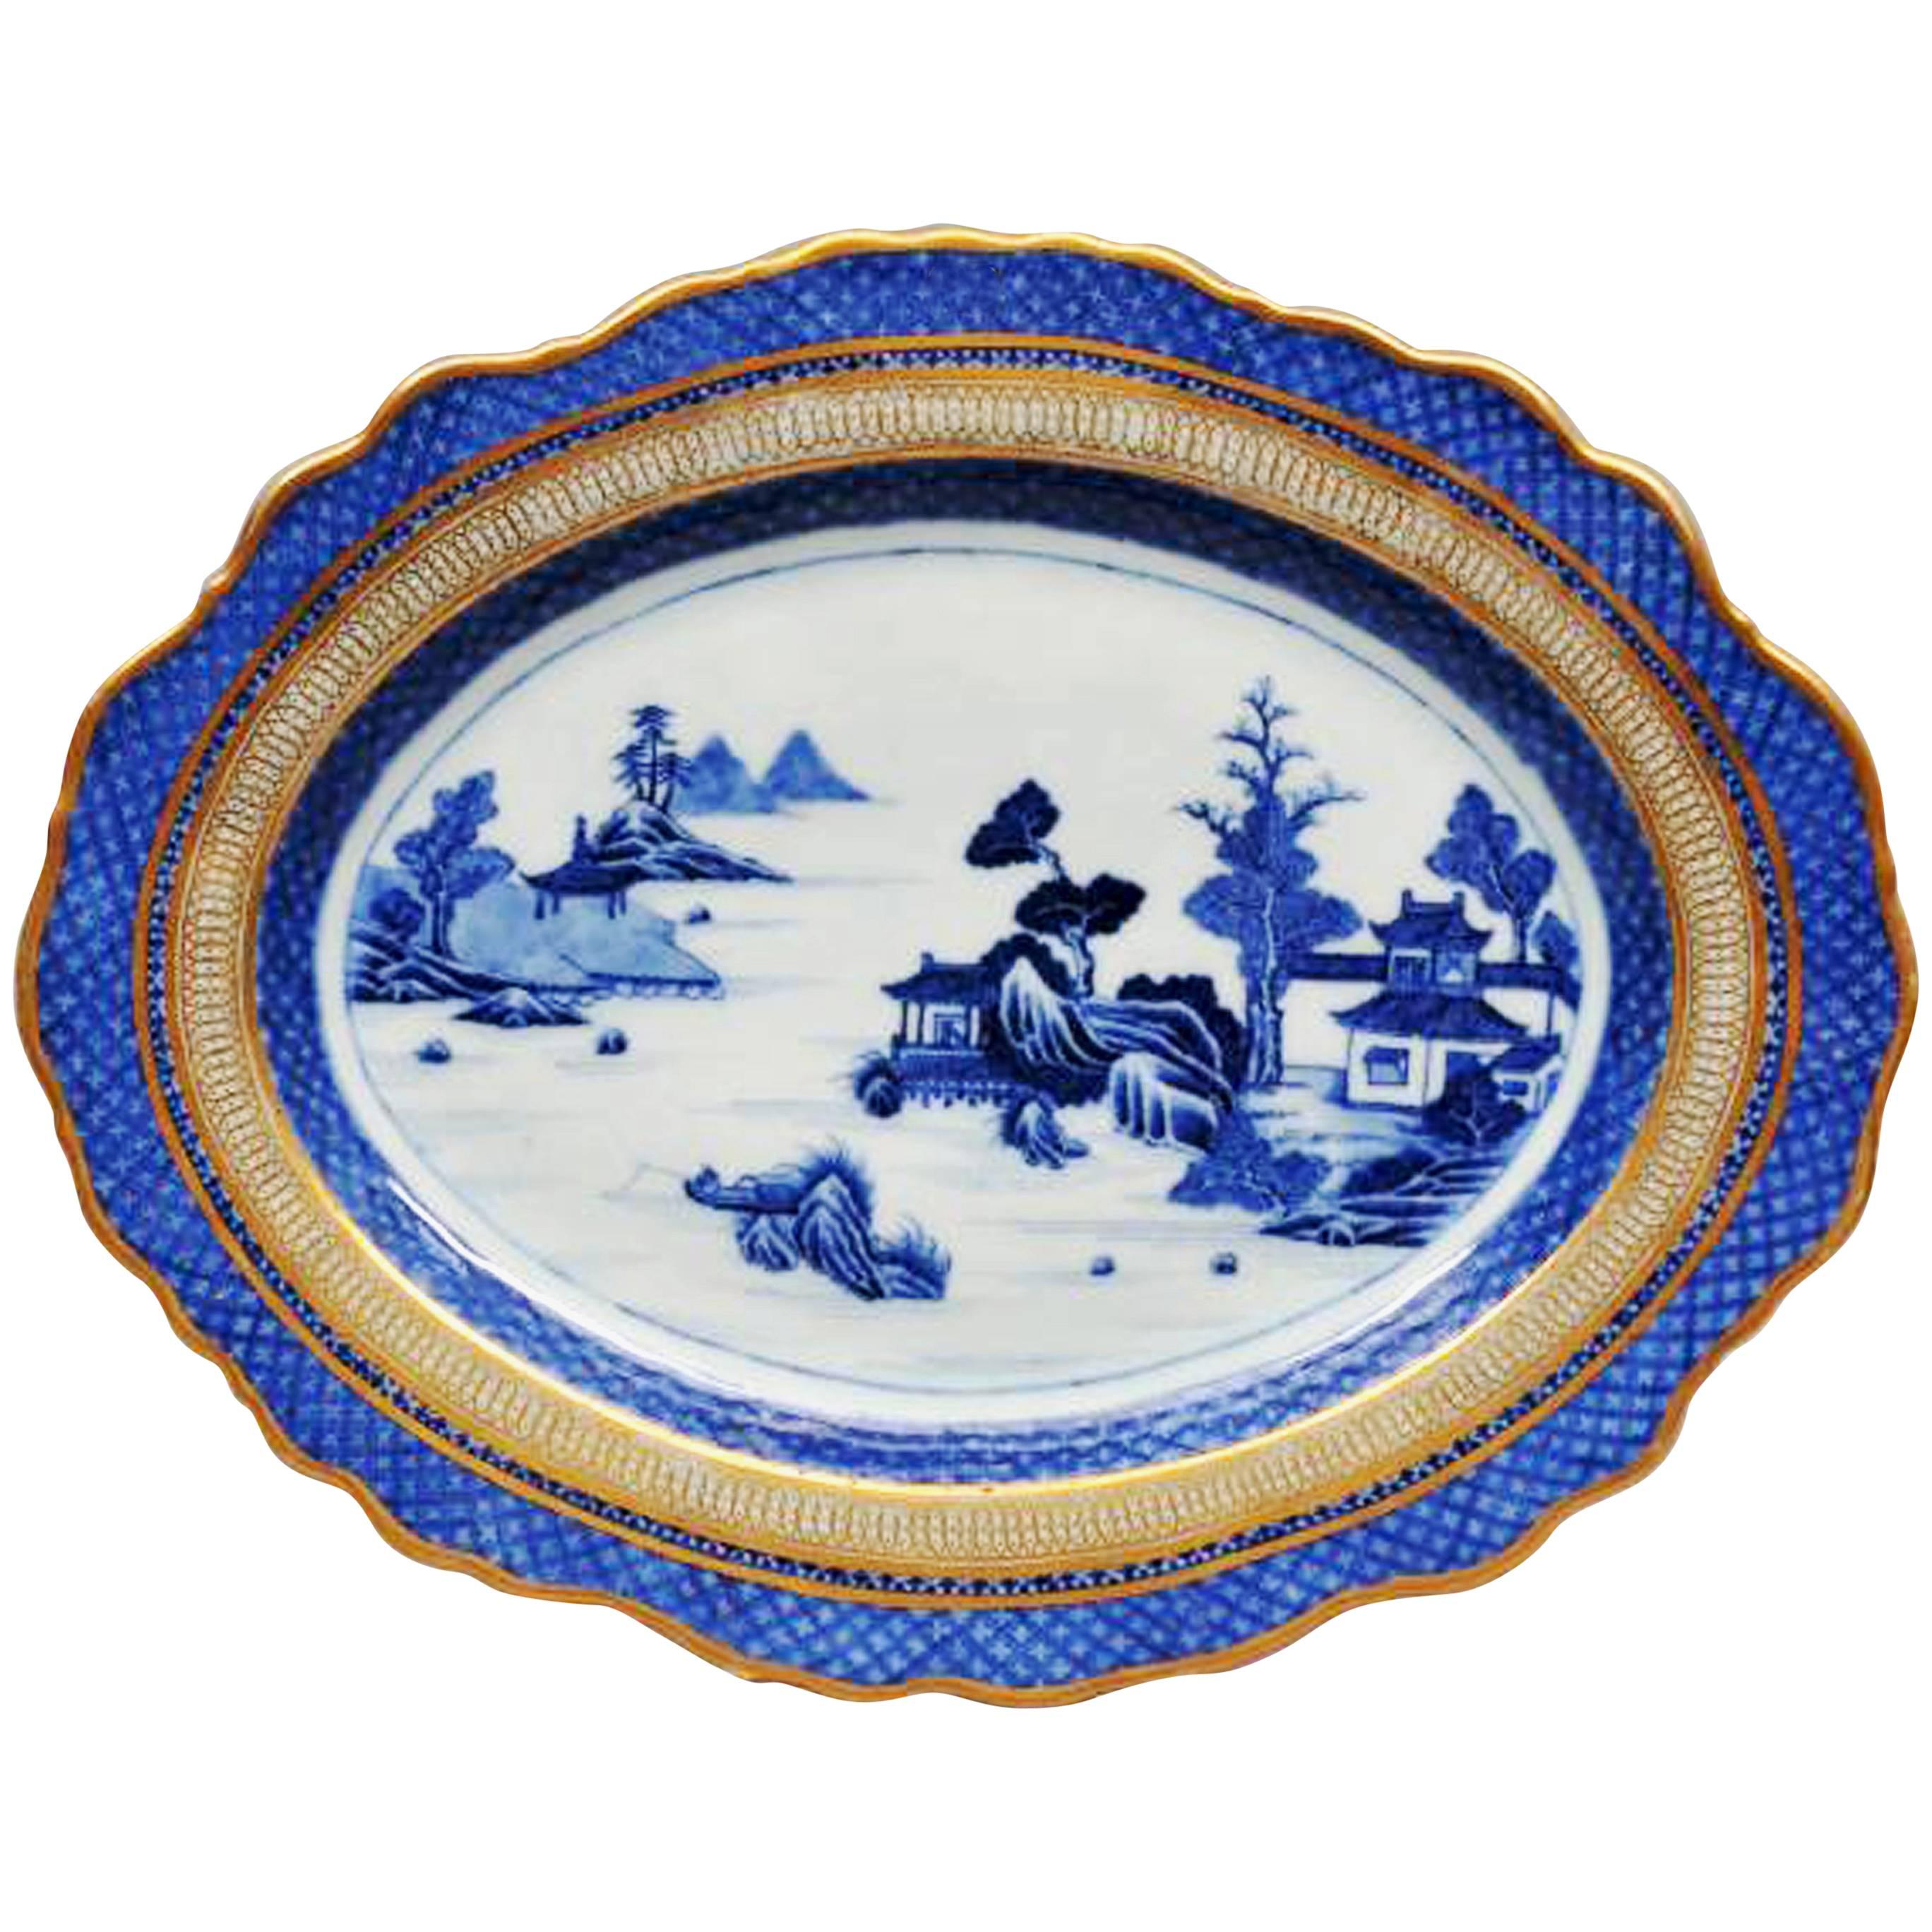 Chinese Export Porcelain Large Blue and White Dish with London Gold, circa 1780